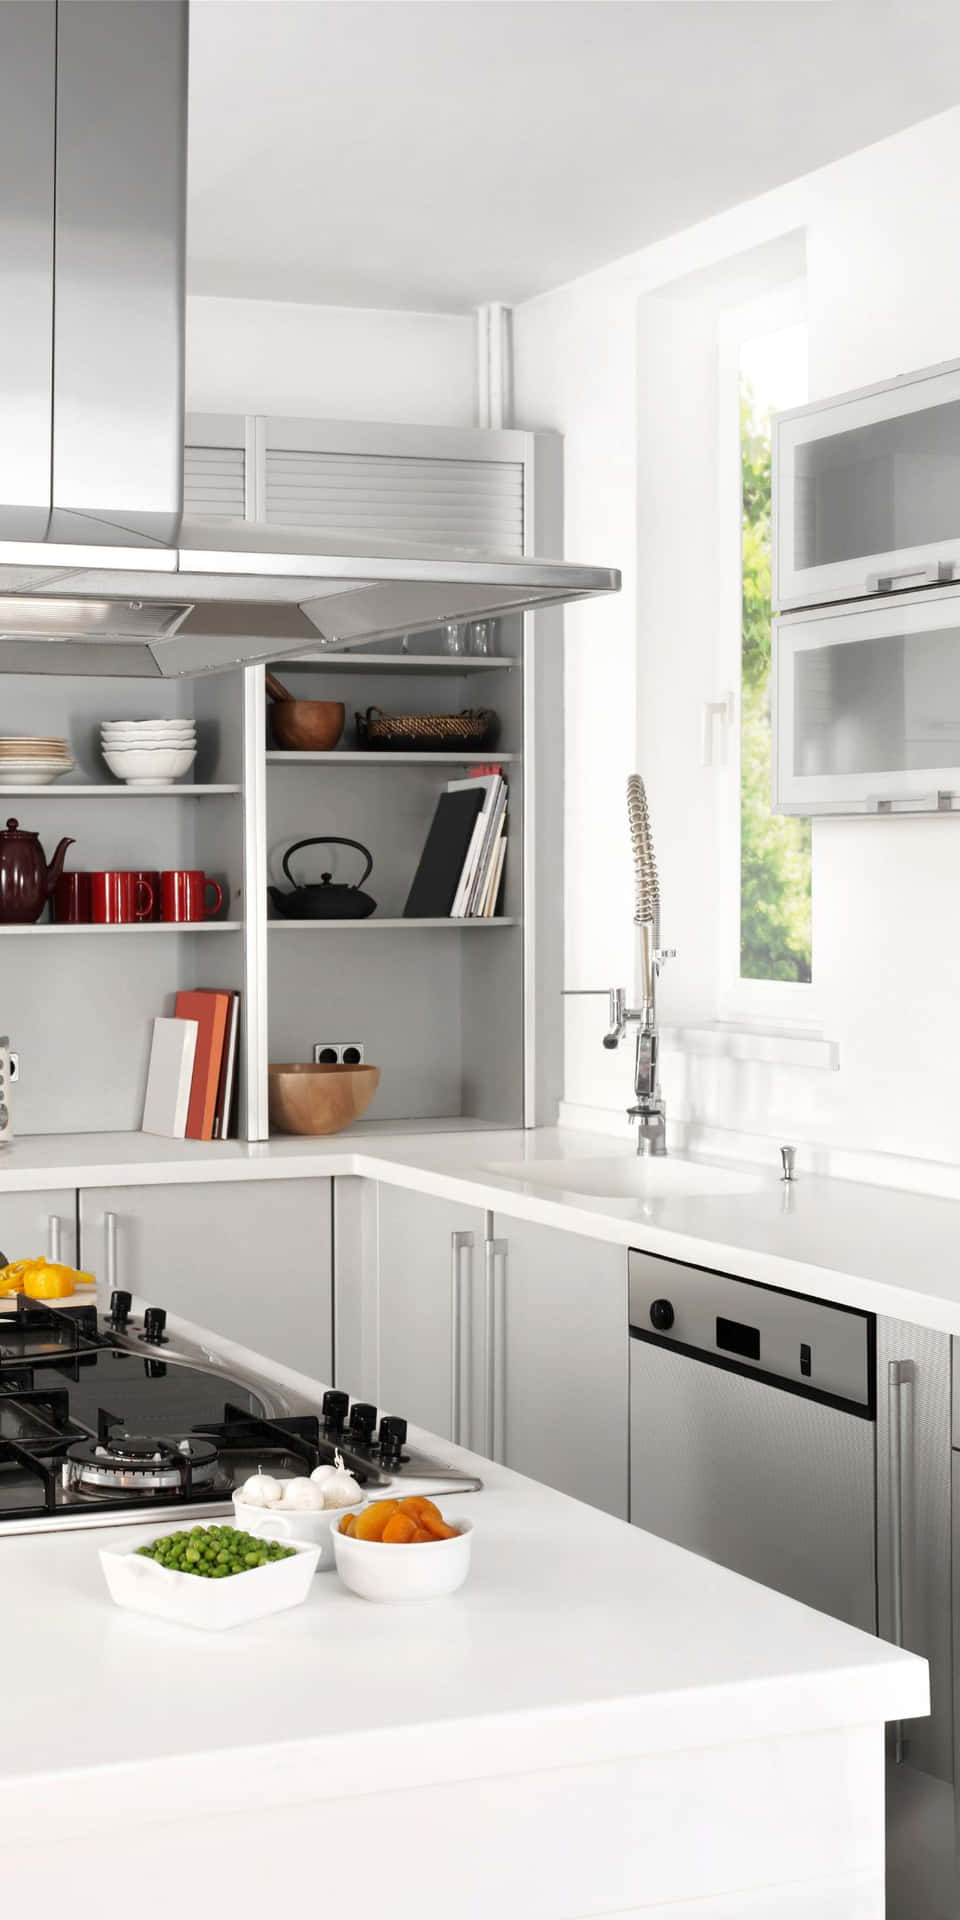 A White Kitchen With A Stove And Oven